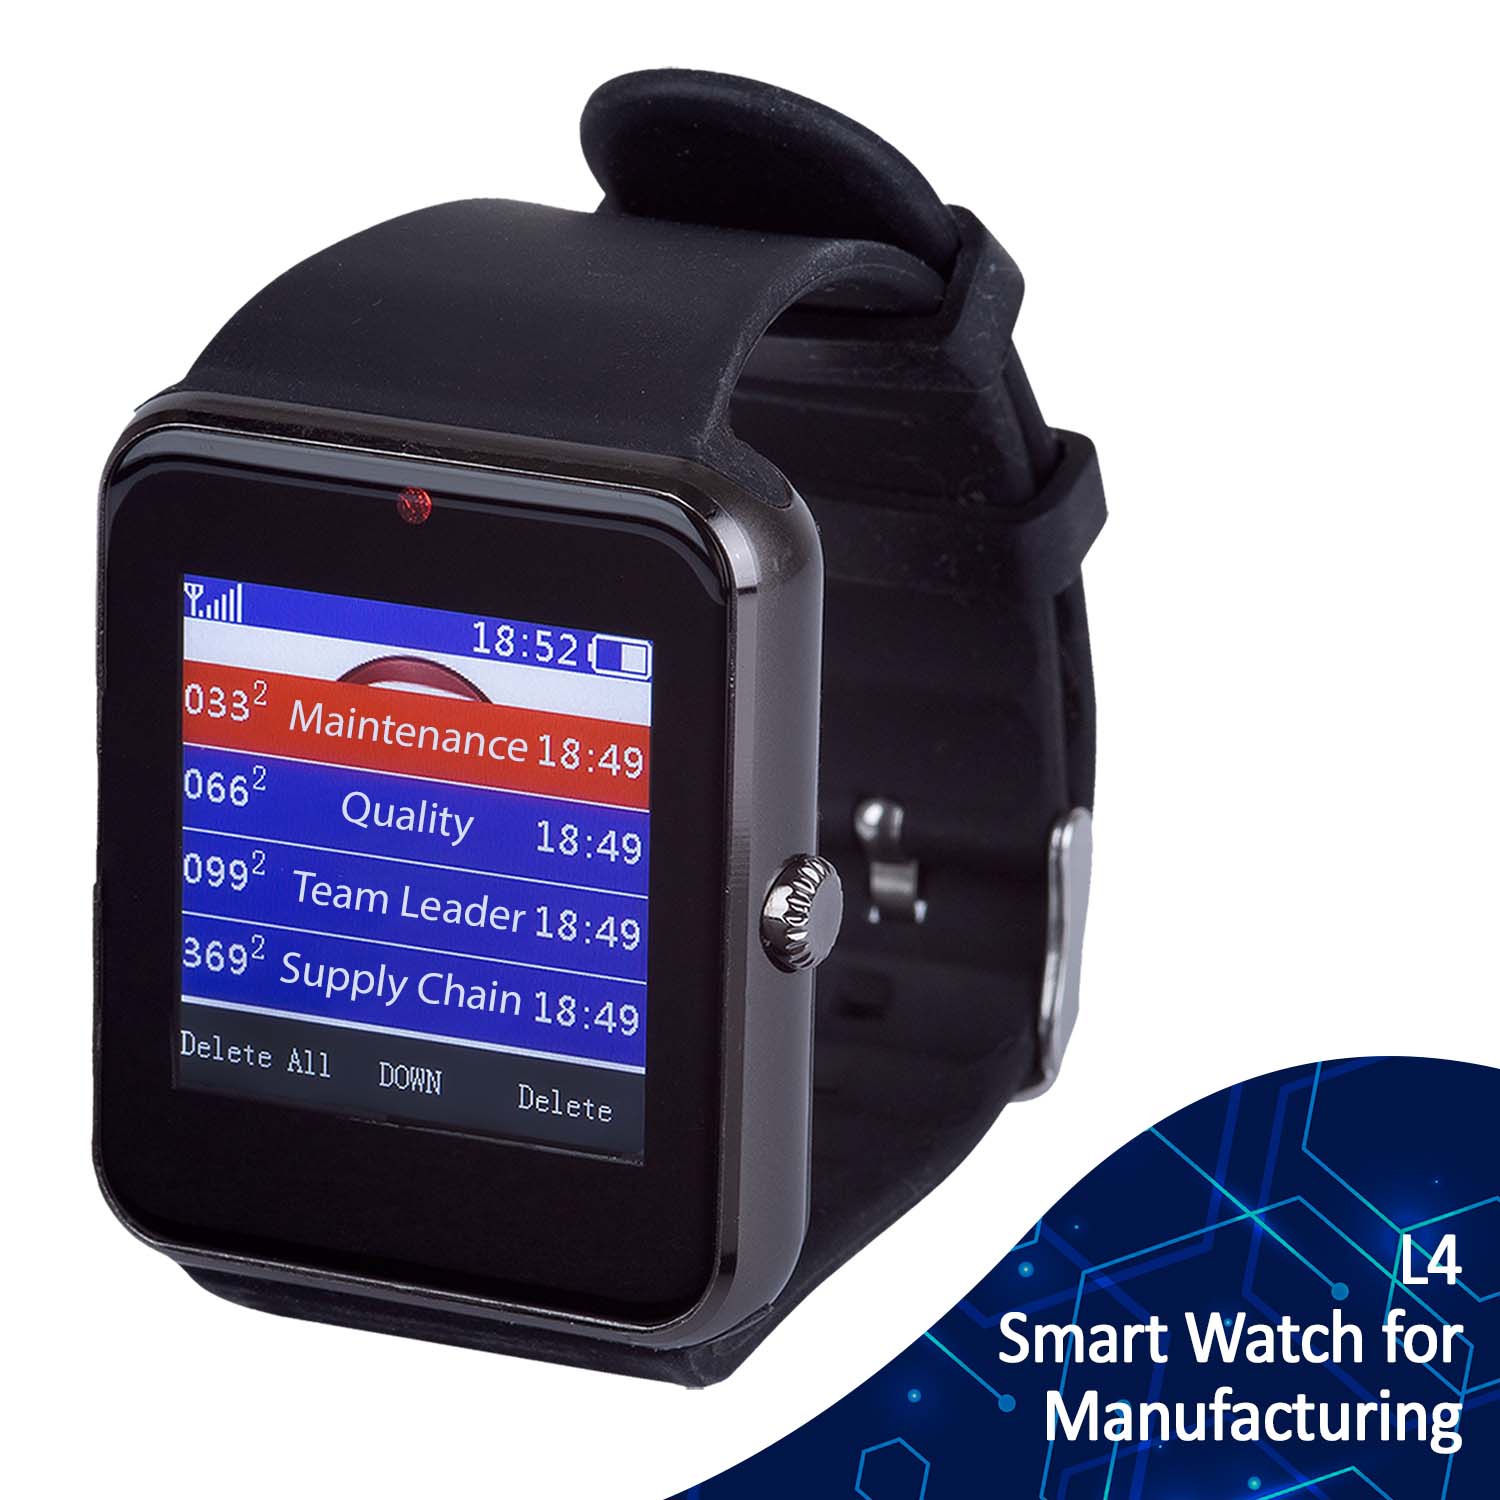 Wireless Receiver Pager in format of a smart watch showing customizable calls for manufacturing industries